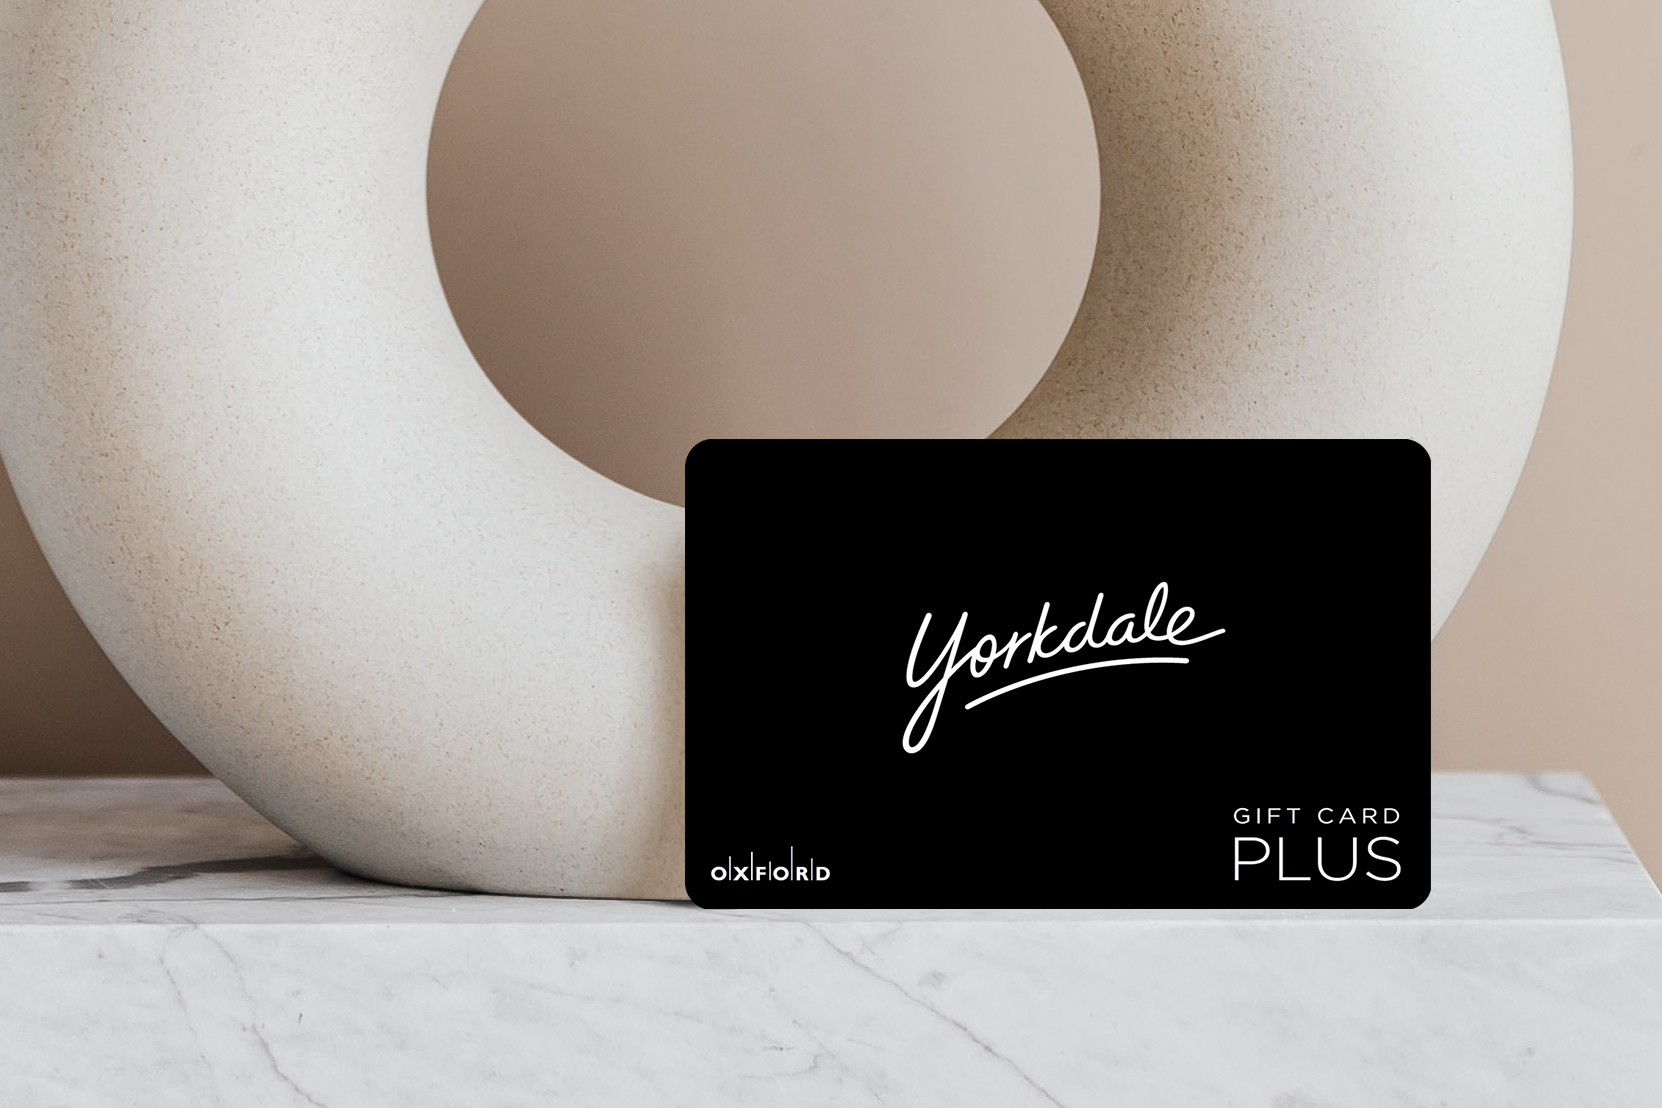 promotional image of a black yorkdale gift card in front of a neutral circular vase